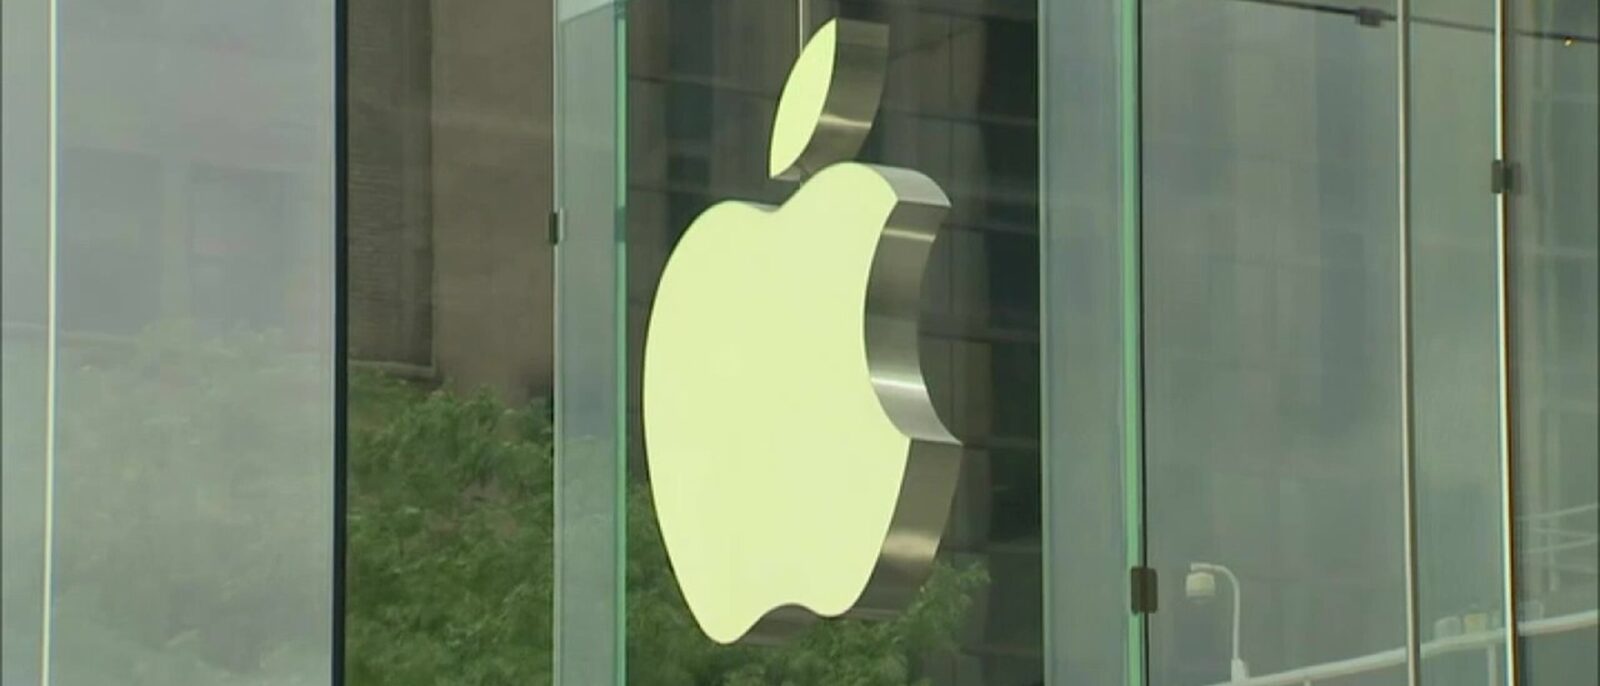 HU professor discusses emergency apple software update with FOX43